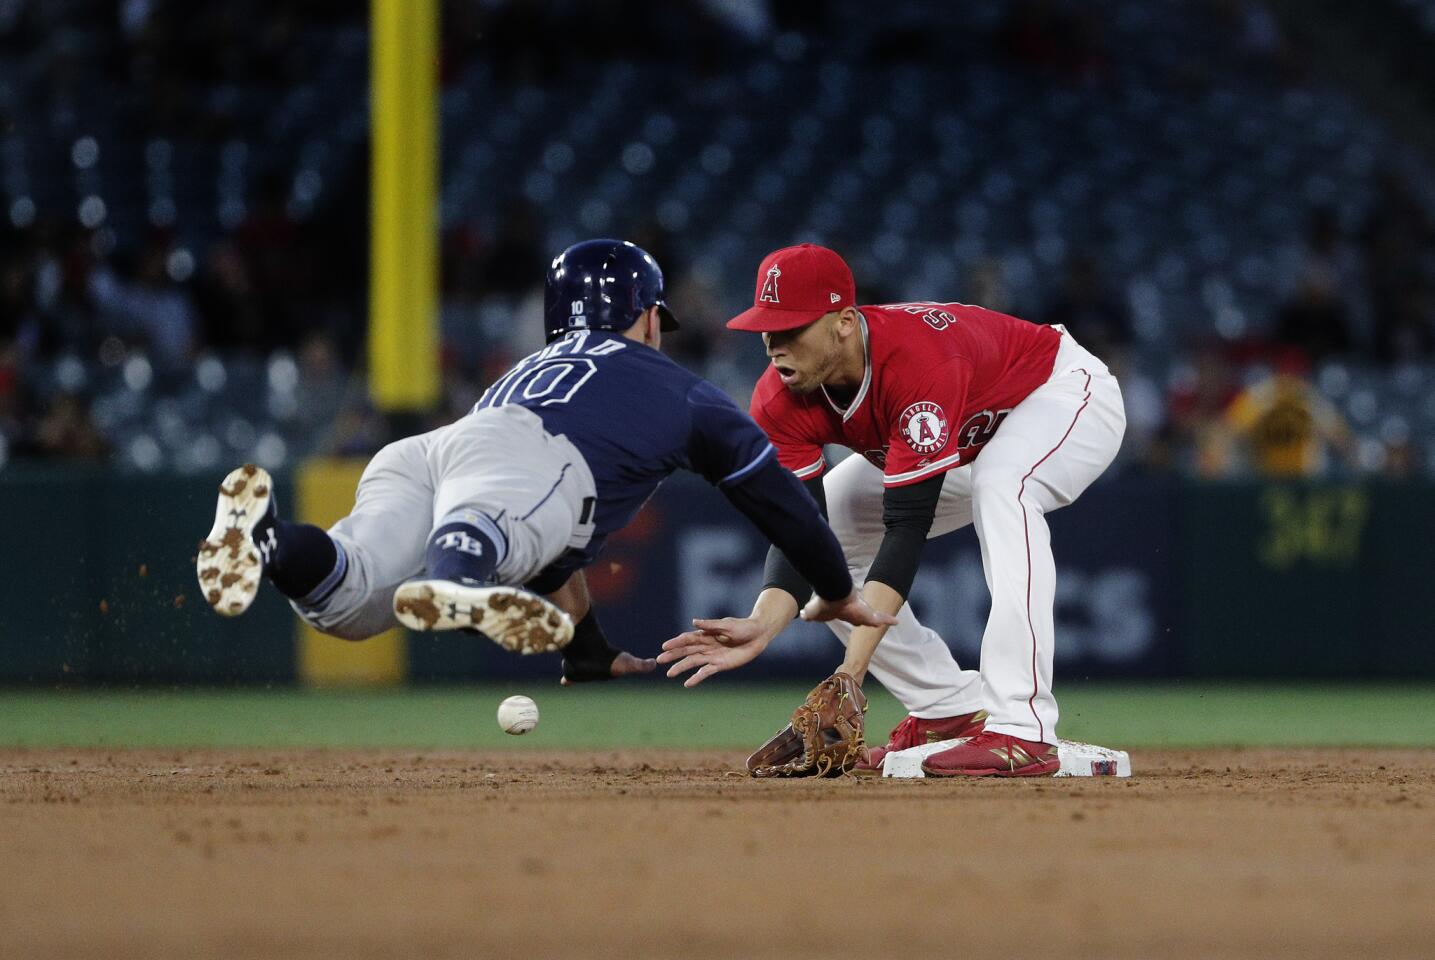 Angels shortstop Andrelton Simmons (2) fields a grounder before tagging out Tampa Bay Rays center fielder Johnny Field (10) during a double play in the third inning on May 17.